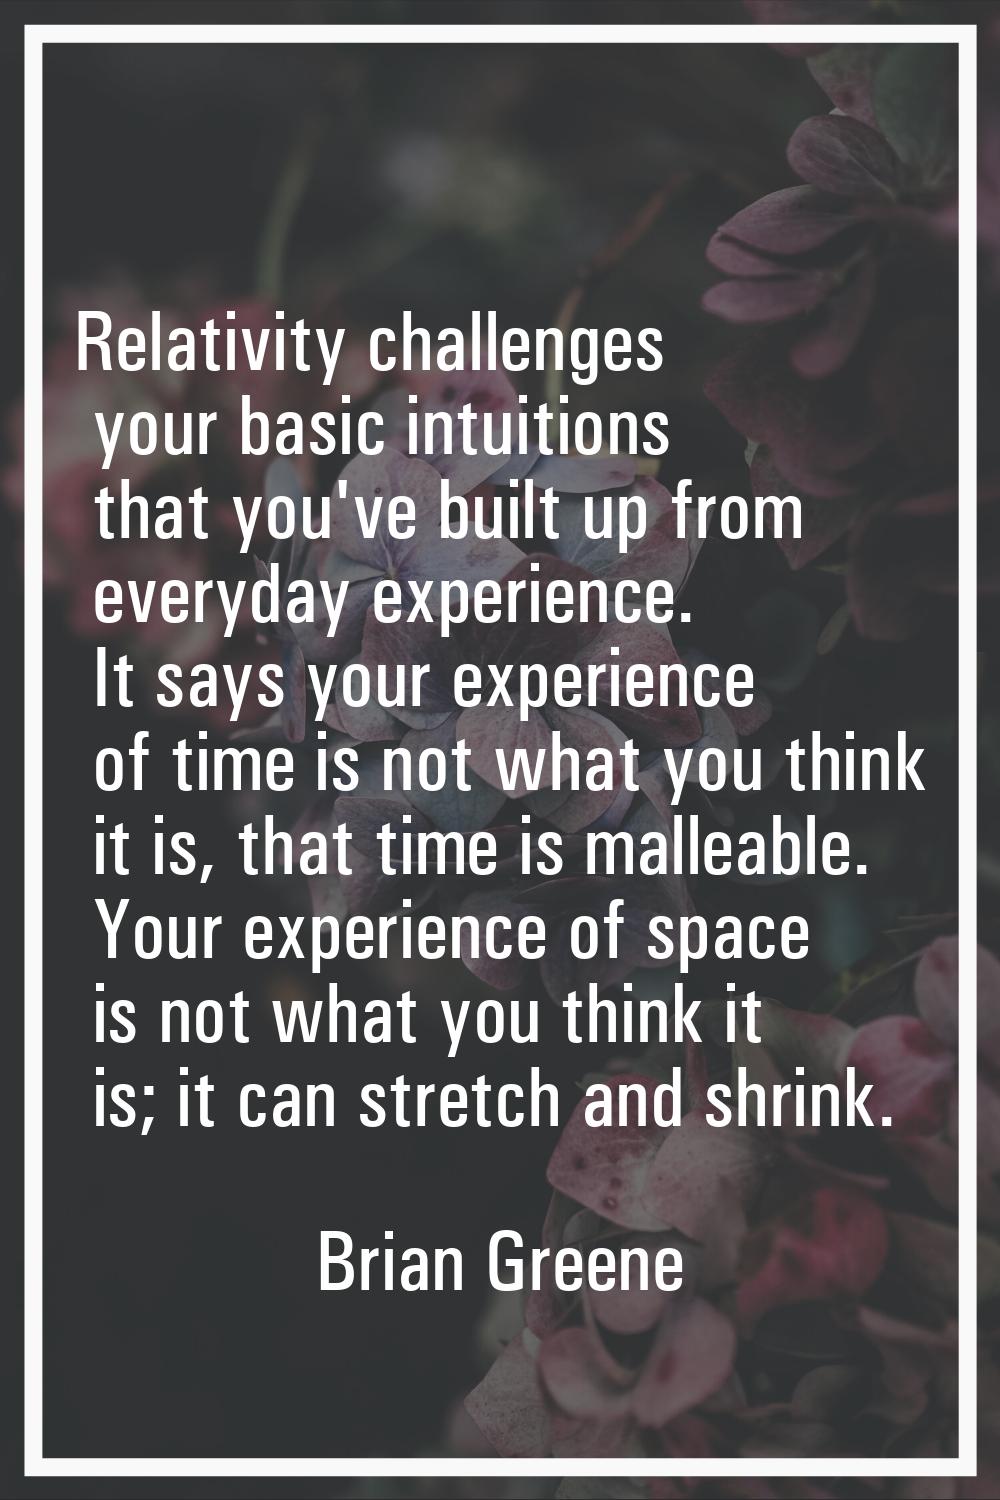 Relativity challenges your basic intuitions that you've built up from everyday experience. It says 